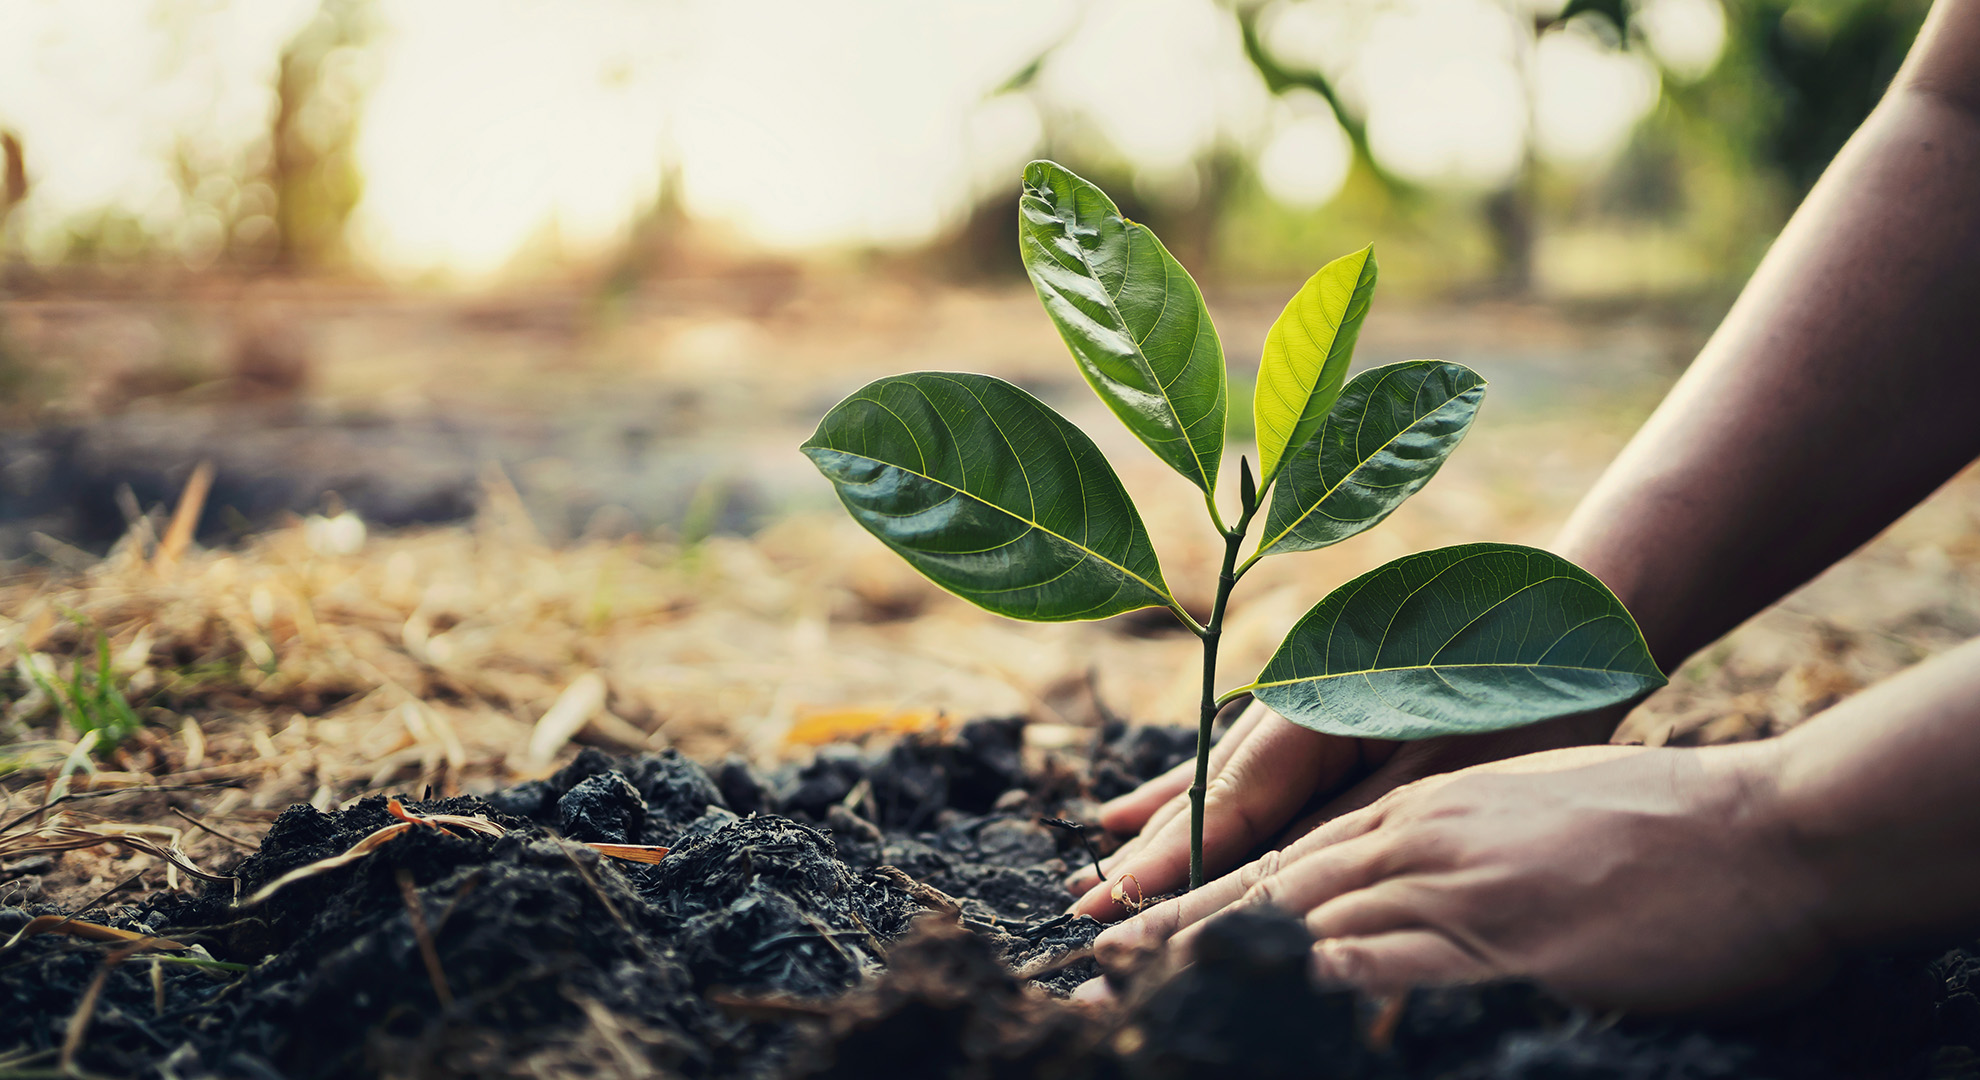 Close-up image of a person holding a plant growing out of the soil.